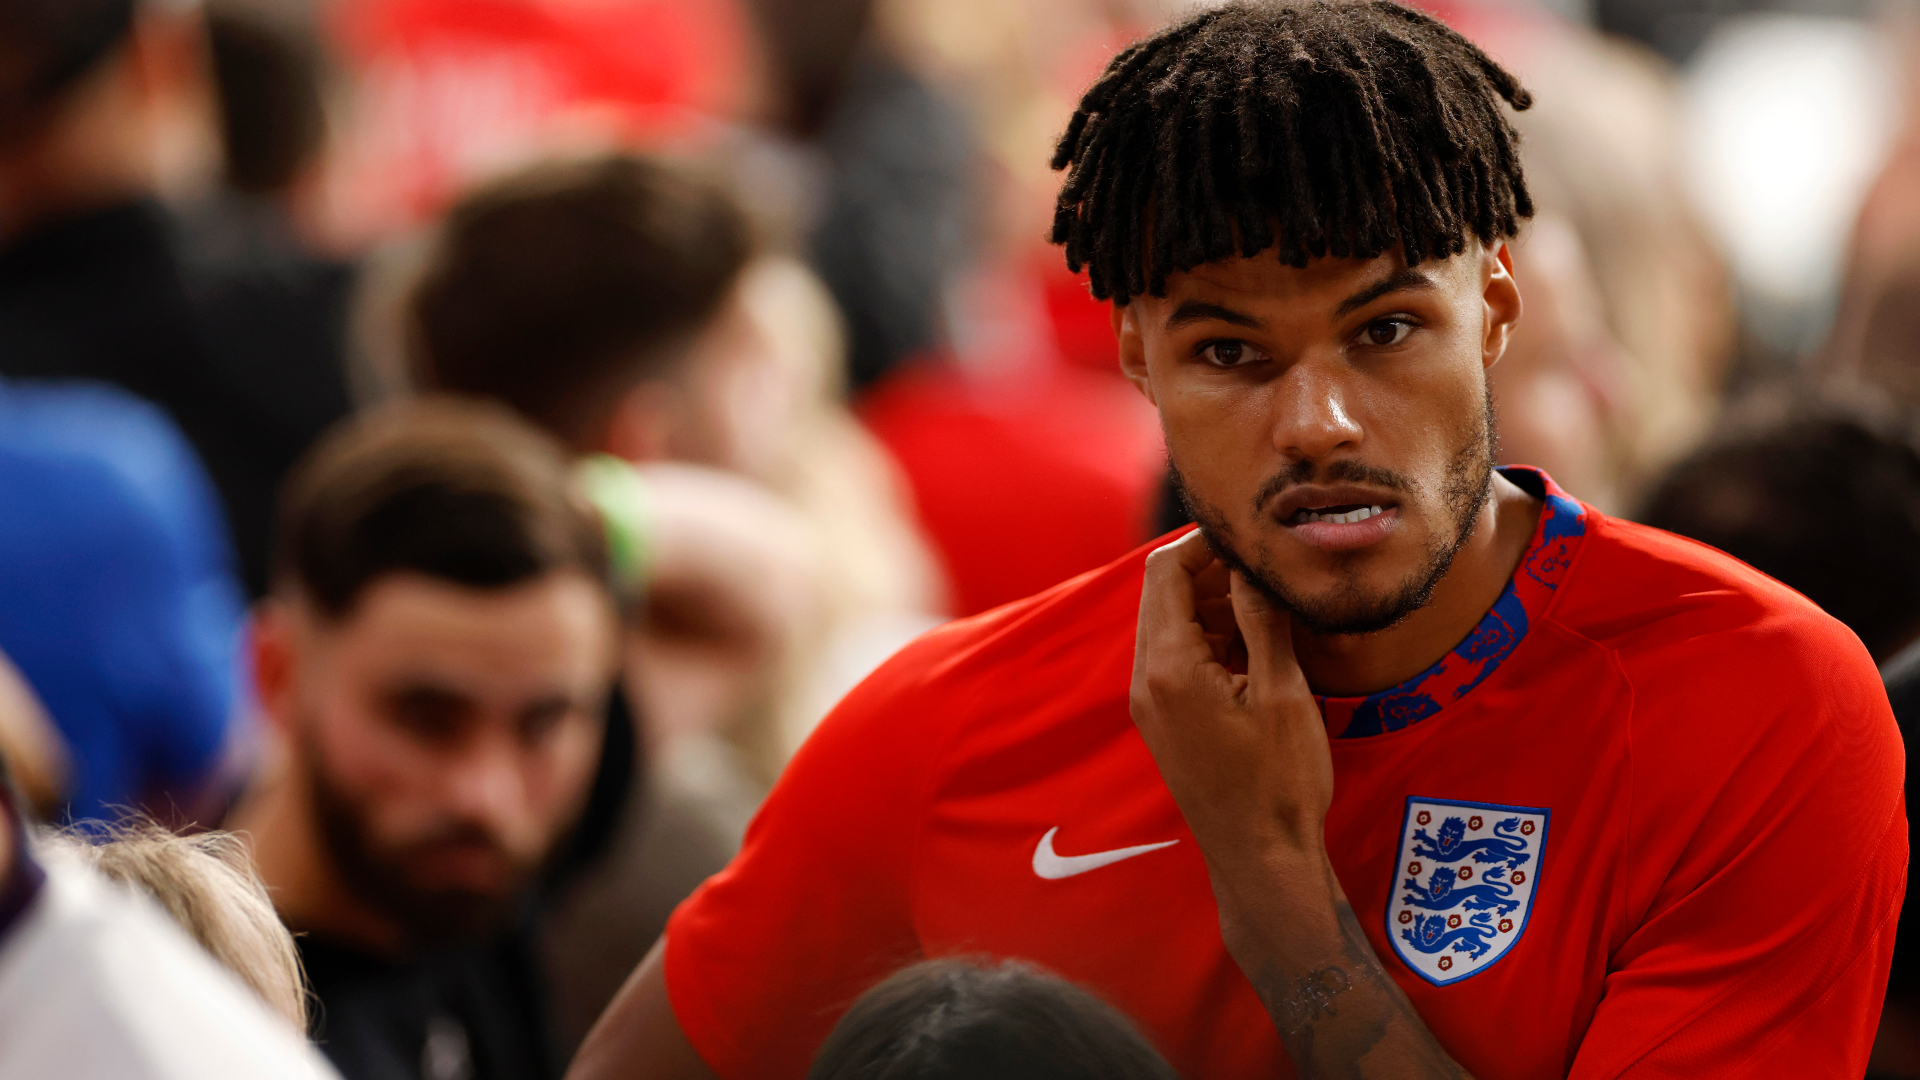 England defender Mings explains how his mental health 'plummeted' due to Euro 2020 criticism